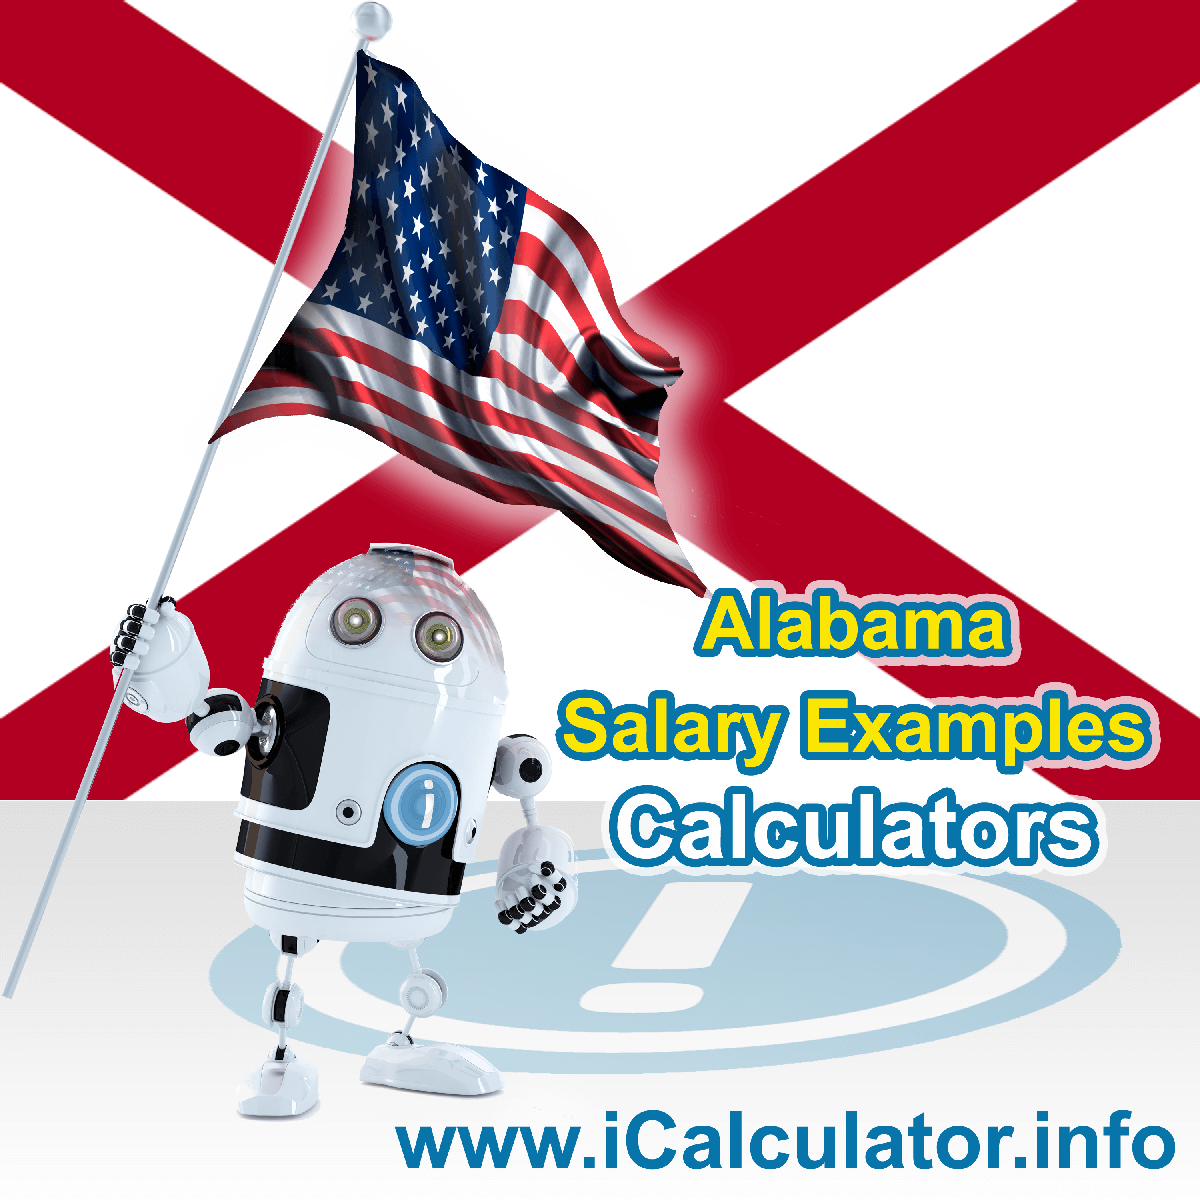 Alabama Salary Example for $ 140,000.00 in 2023 | iCalculator™ | $ 140,000.00 salary example for employee and employer paying Alabama State tincome taxes. Detailed salary after tax calculation including Alabama State Tax, Federal State Tax, Medicare Deductions, Social Security, Capital Gains and other income tax and salary deductions complete with supporting Alabama state tax tables 